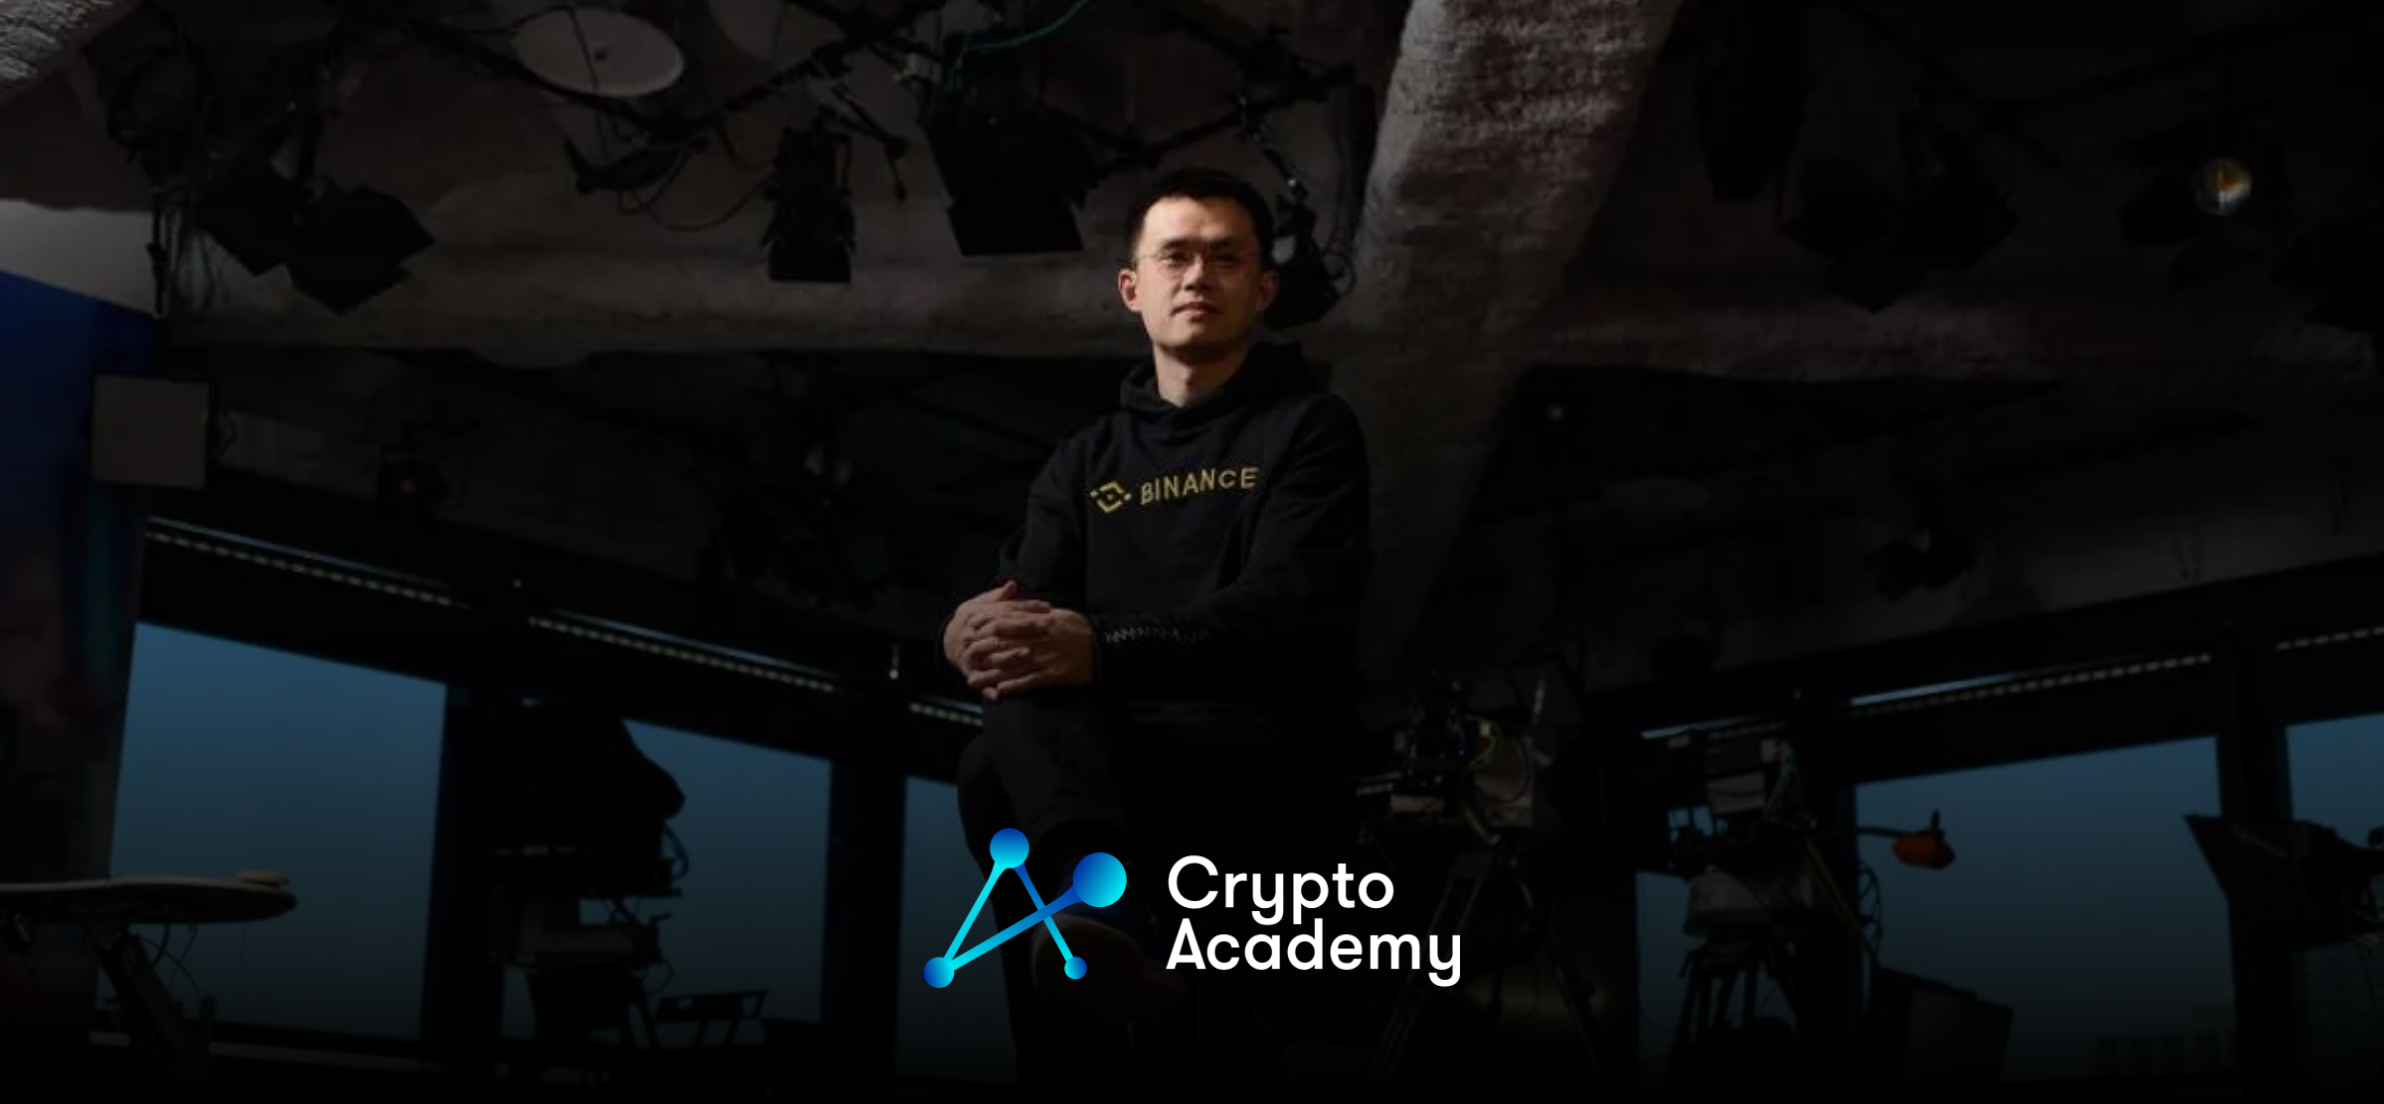 X Restricts Changpeng Zhao’s Account After Name Change Removes ‘Binance’